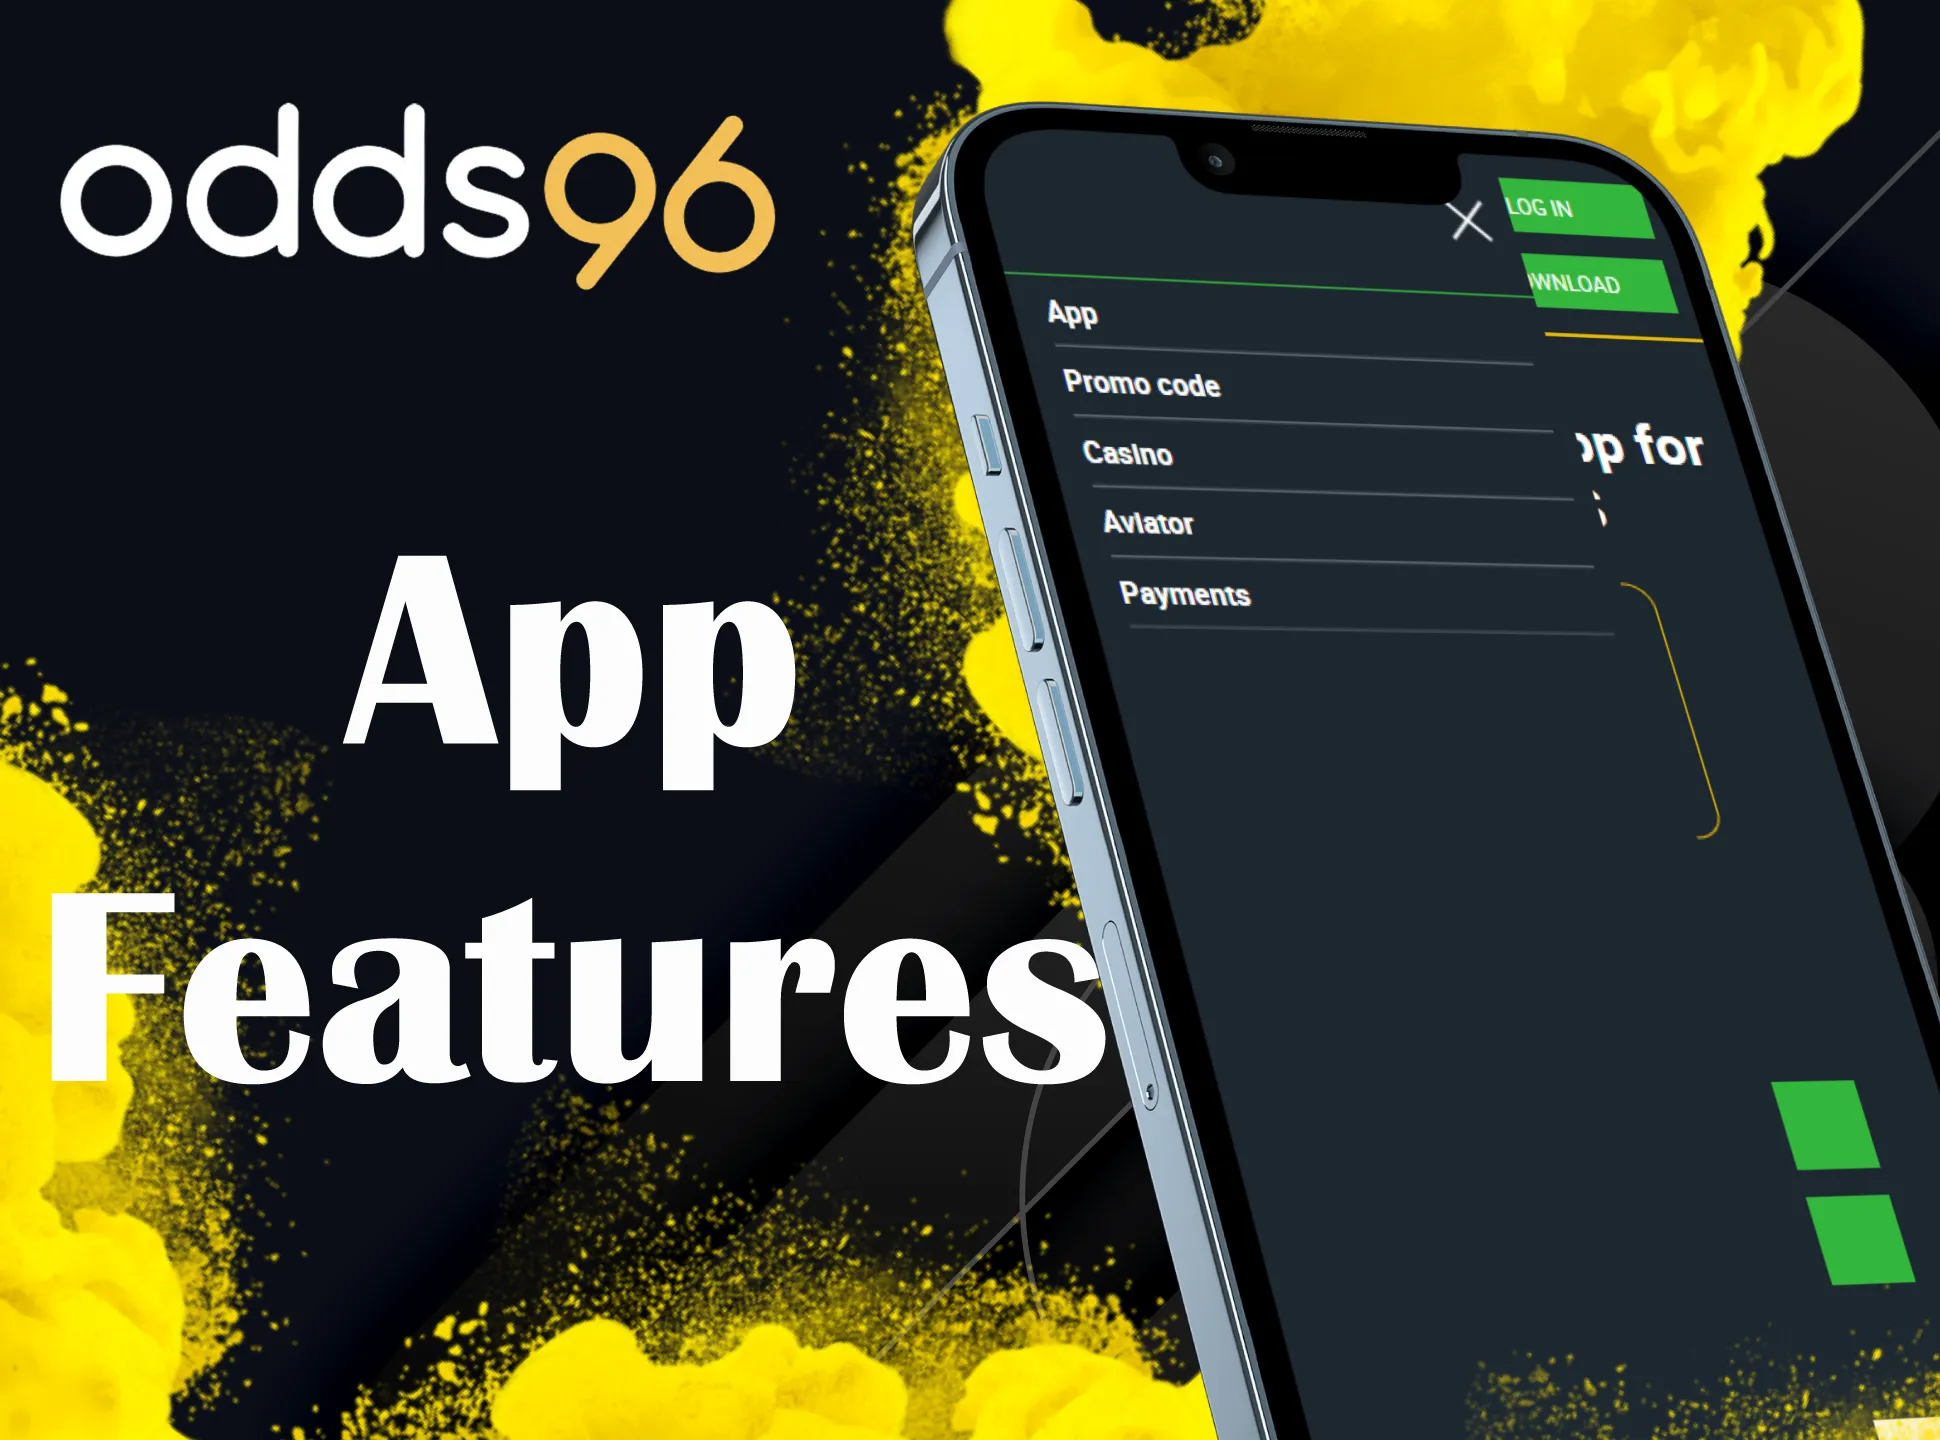 Learn for more Odds96 new features.